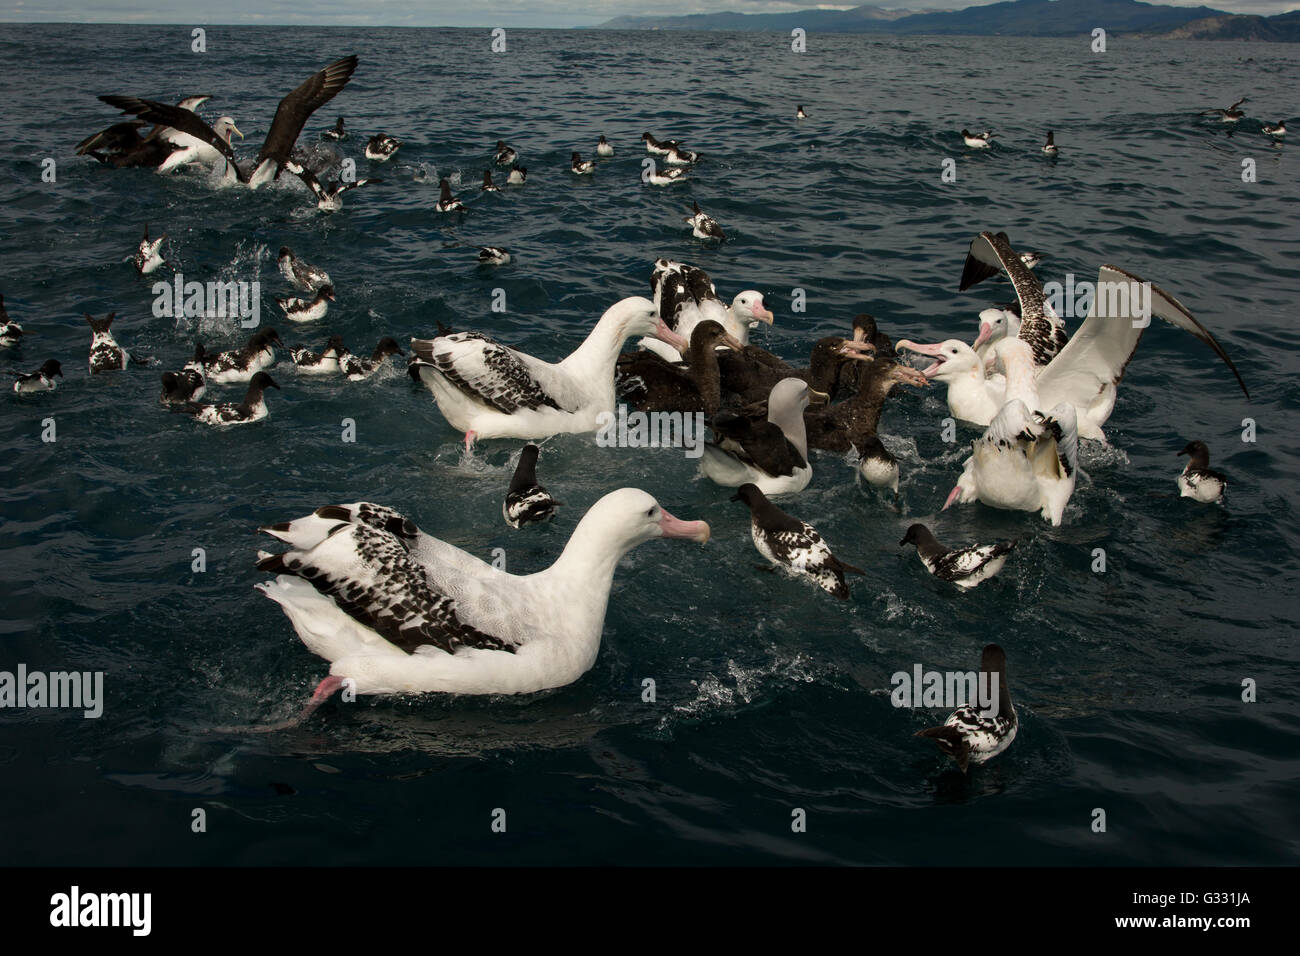 Albatross Encounter attract on the Pacific Ocean albatrosses and other seabirds with baits from fish liver. Stock Photo